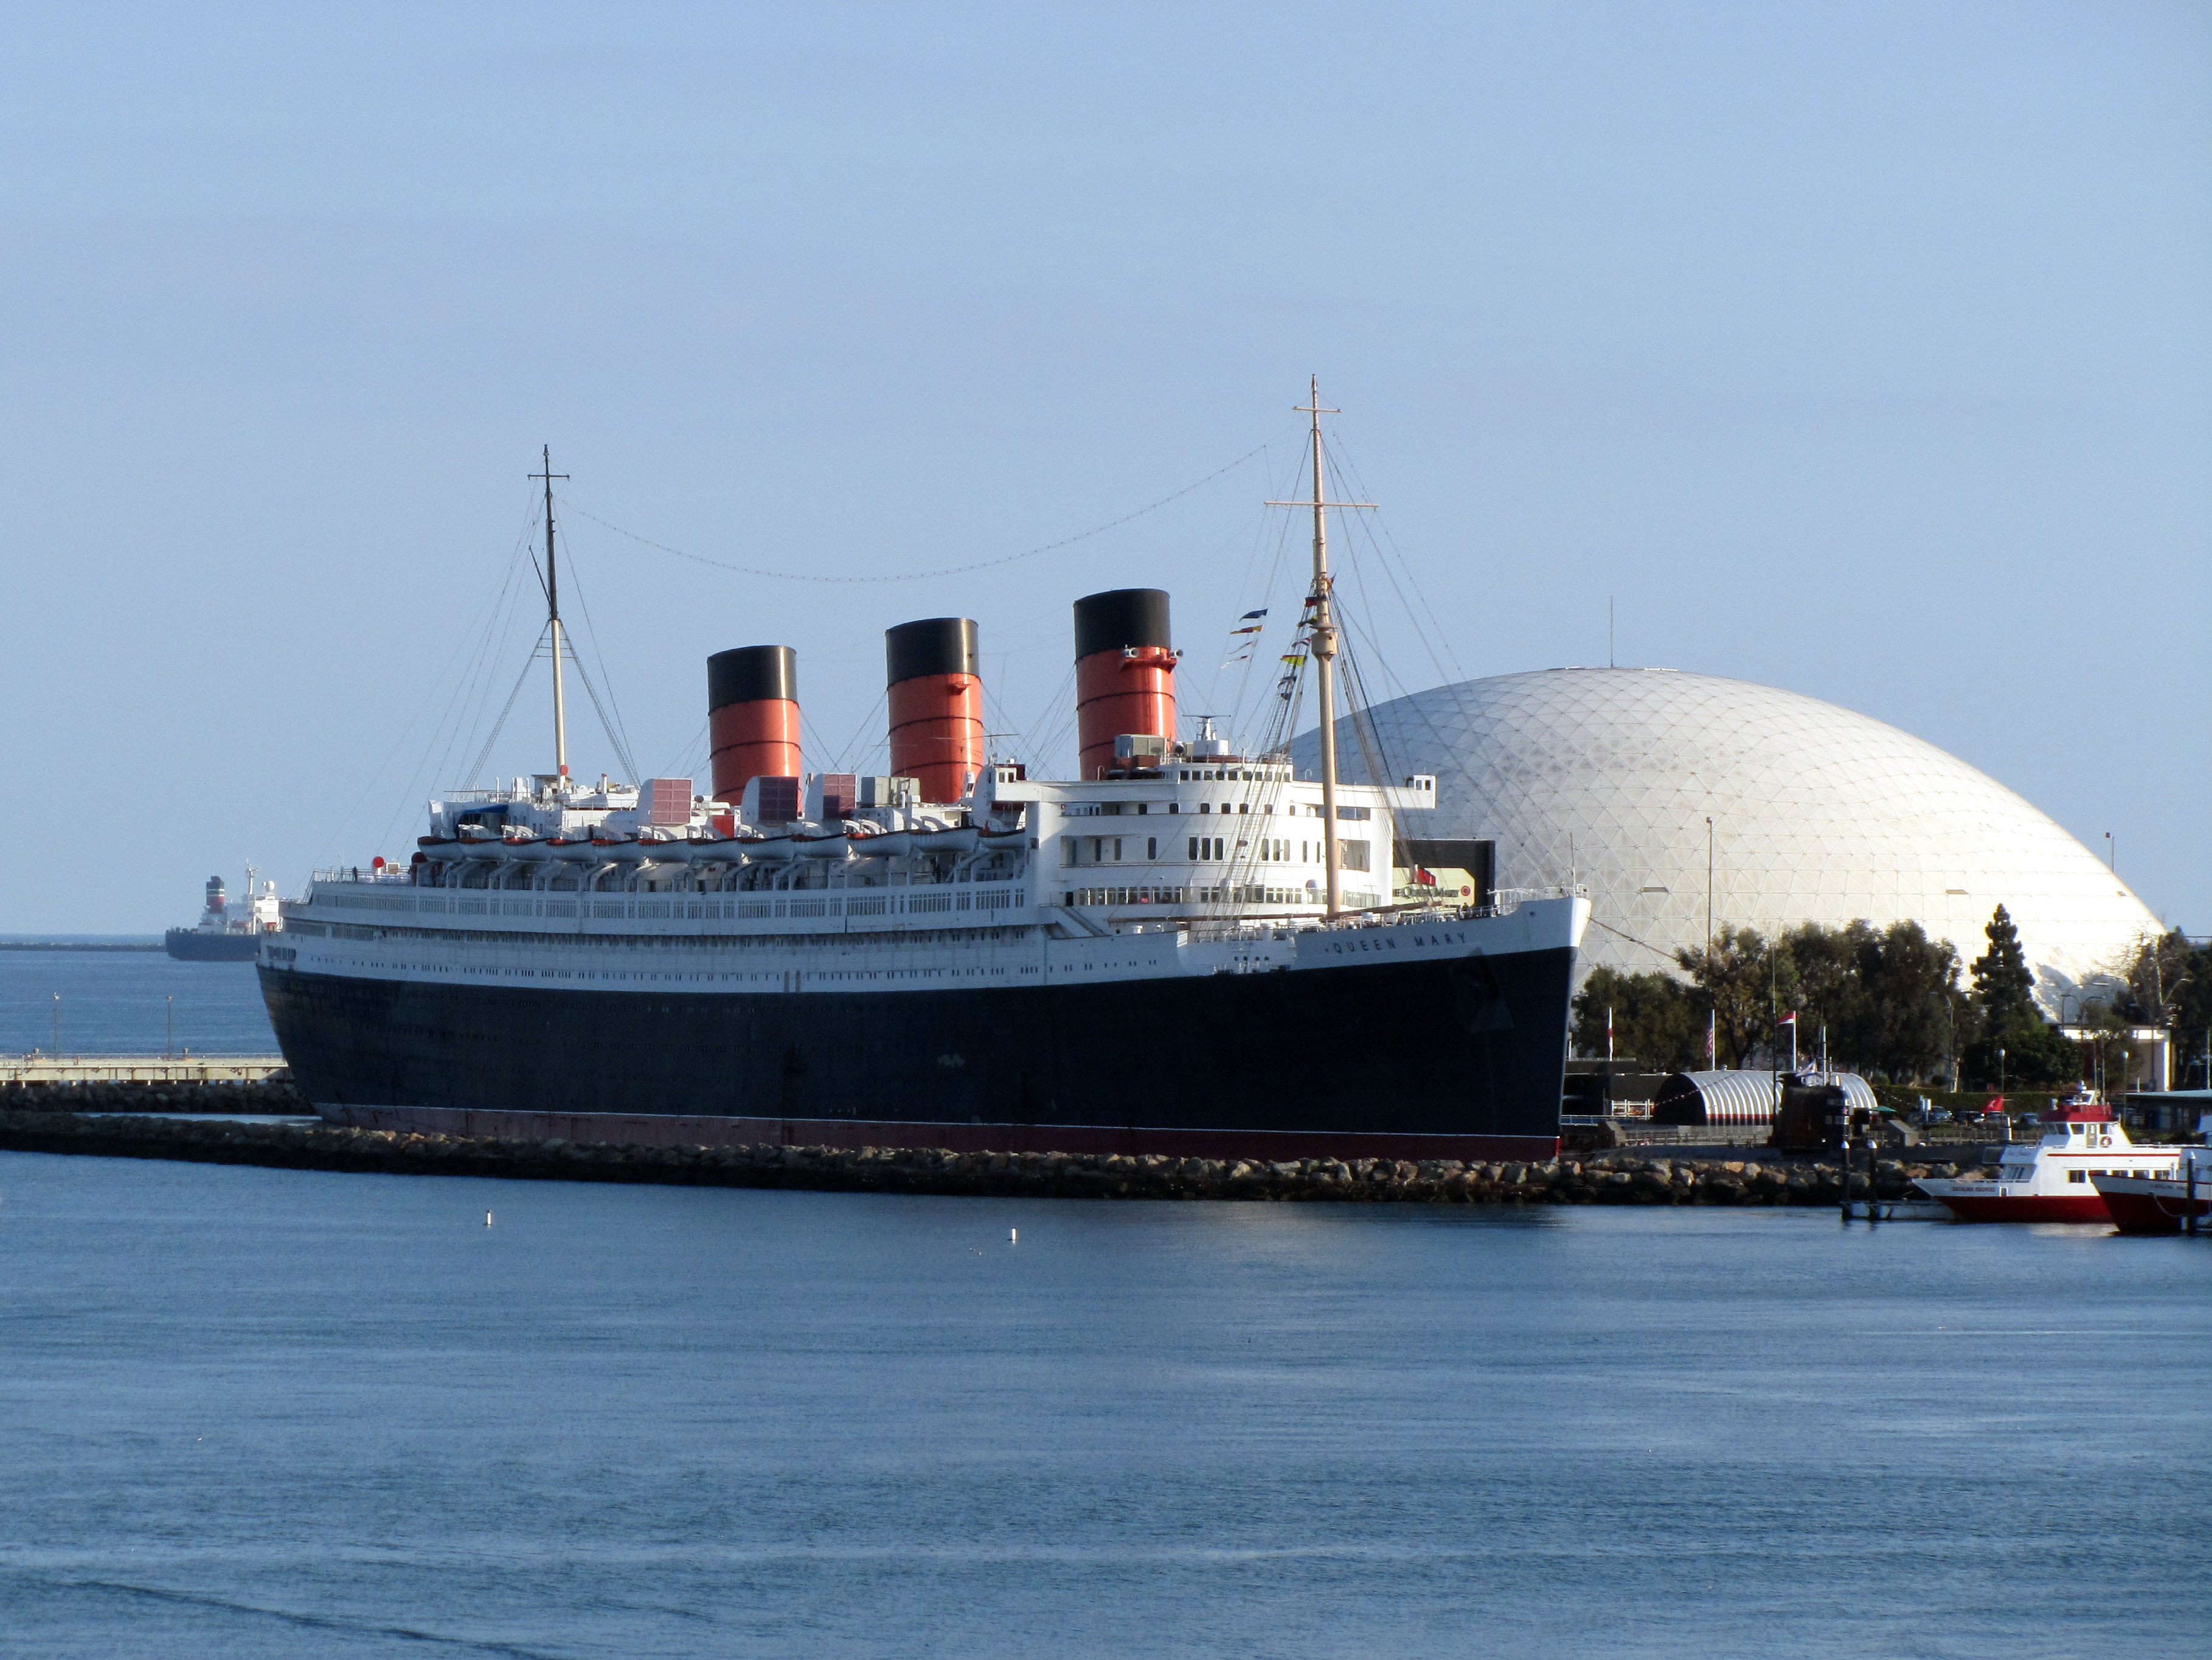 File:RMS Queen Mary Long Beach January 2011.jpg - Wikimedia Commons